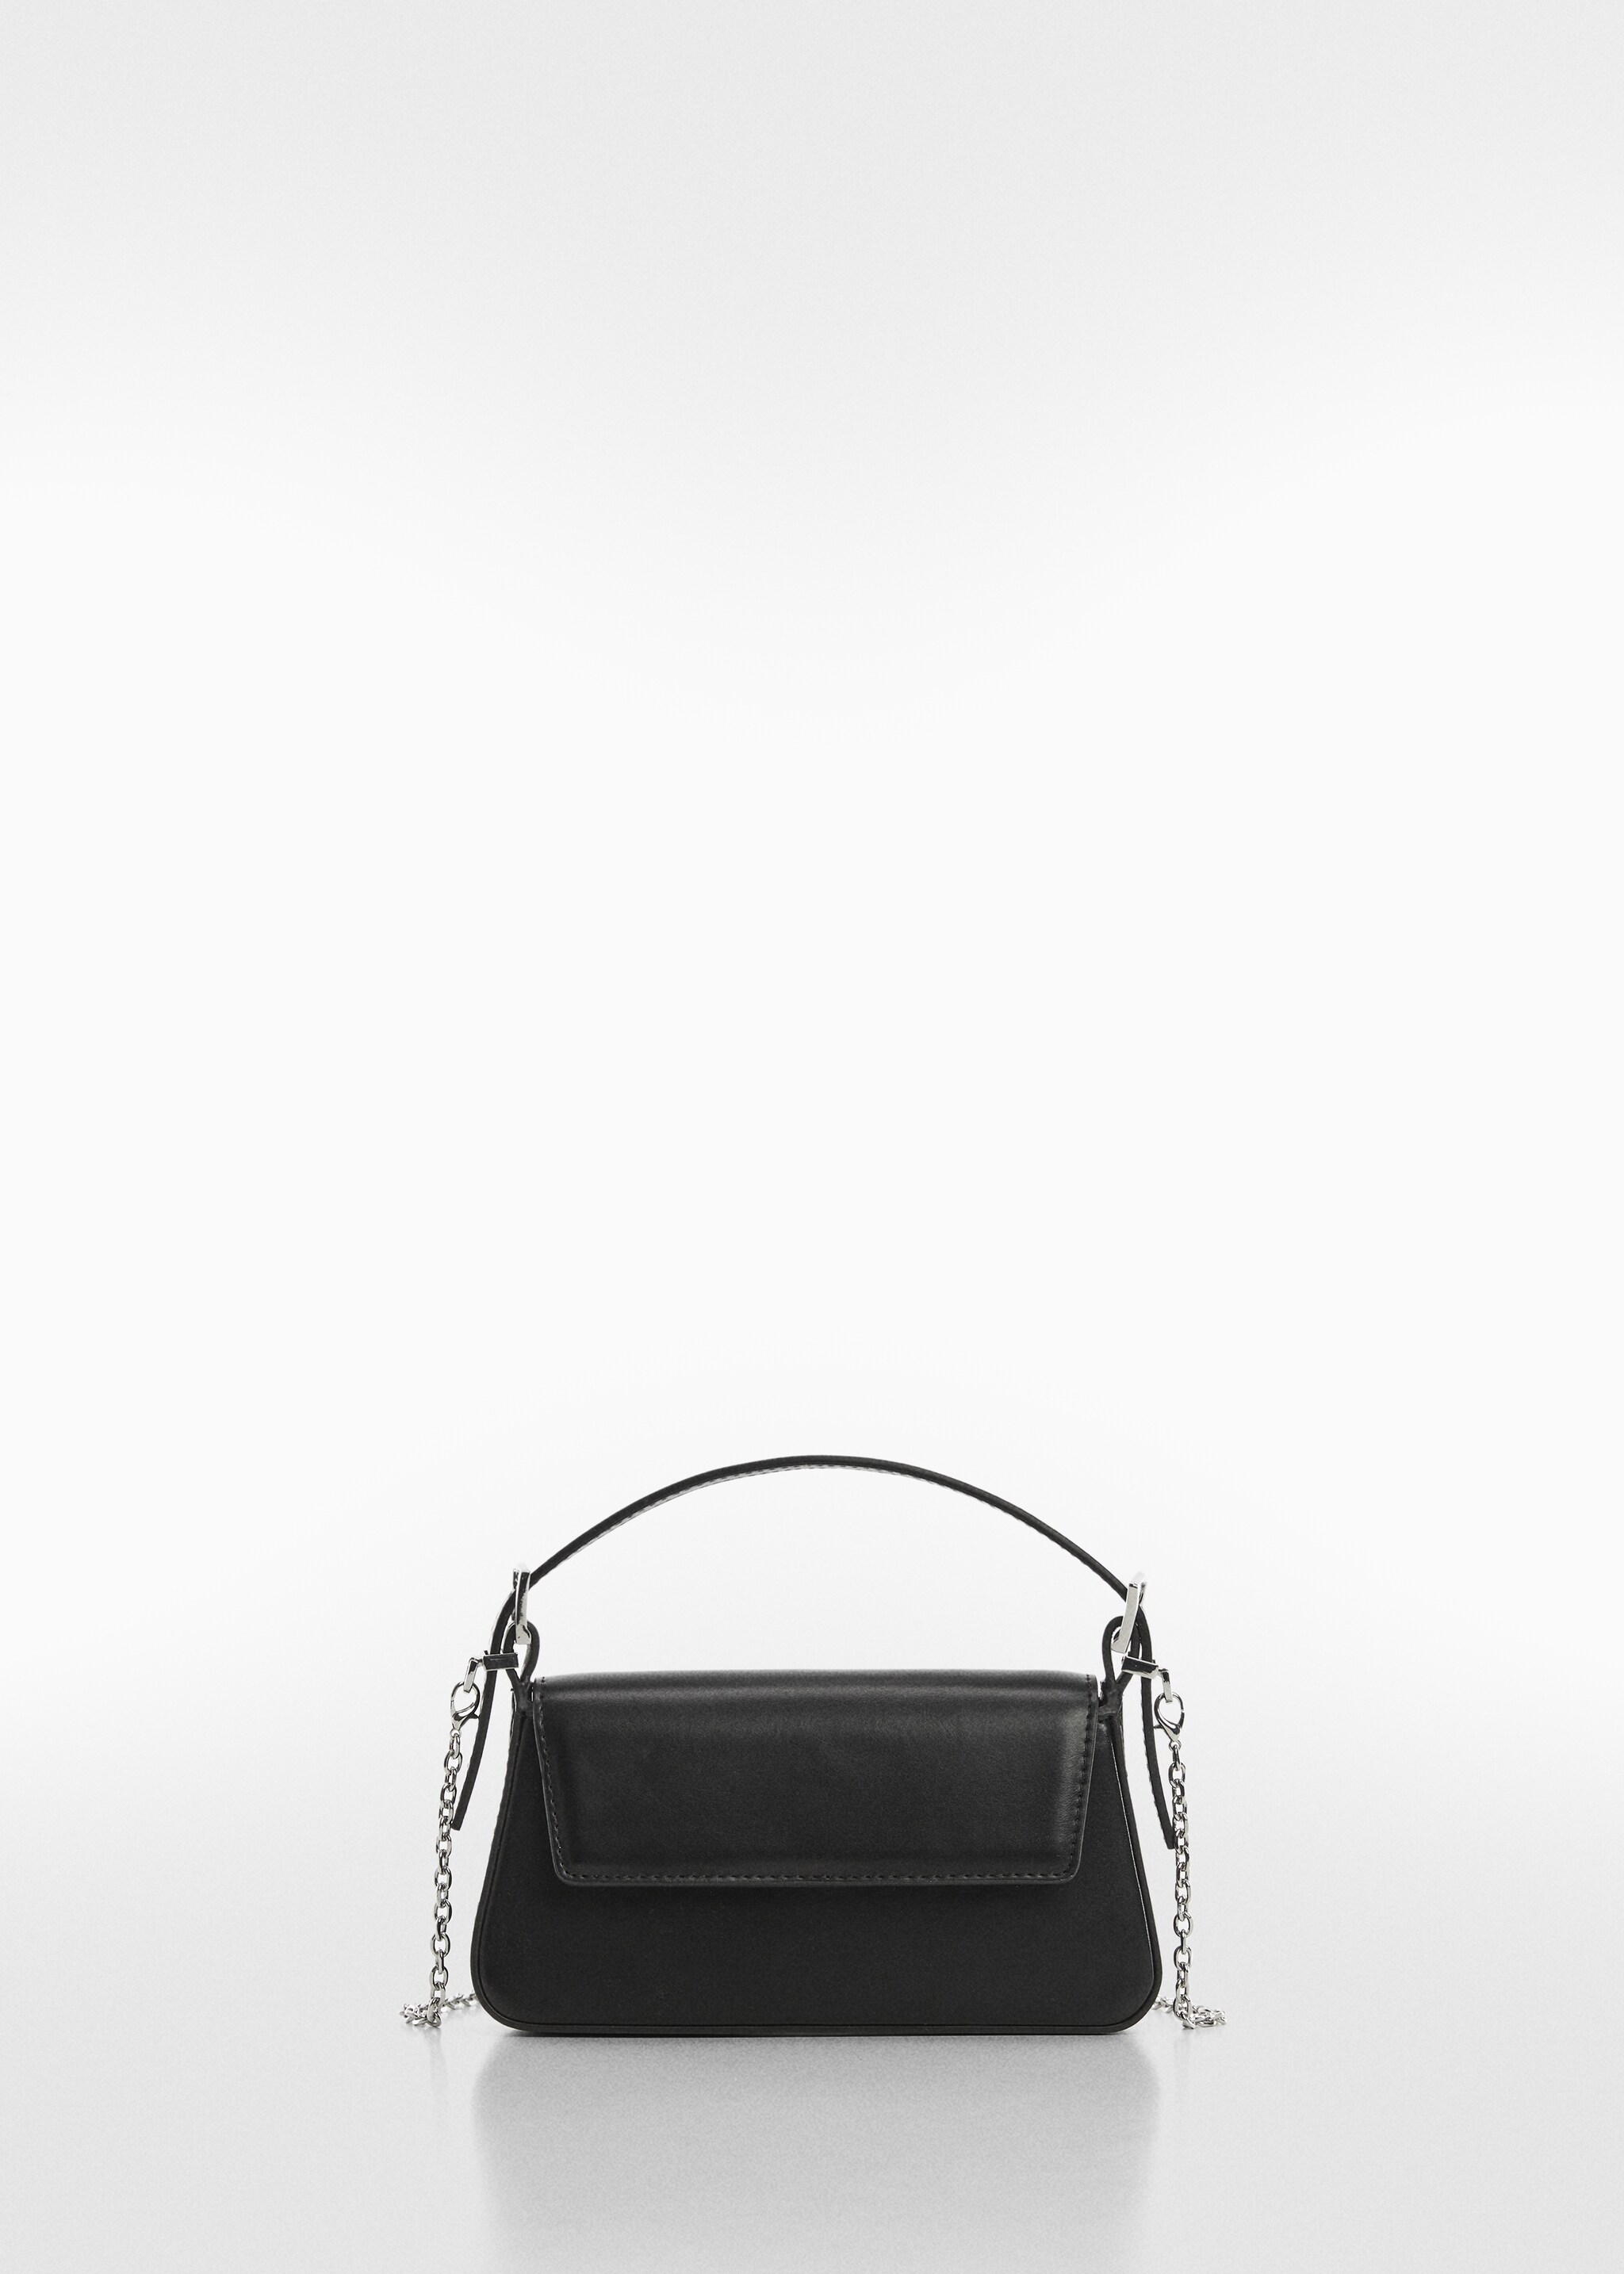 Double strap bag with flap - Article without model